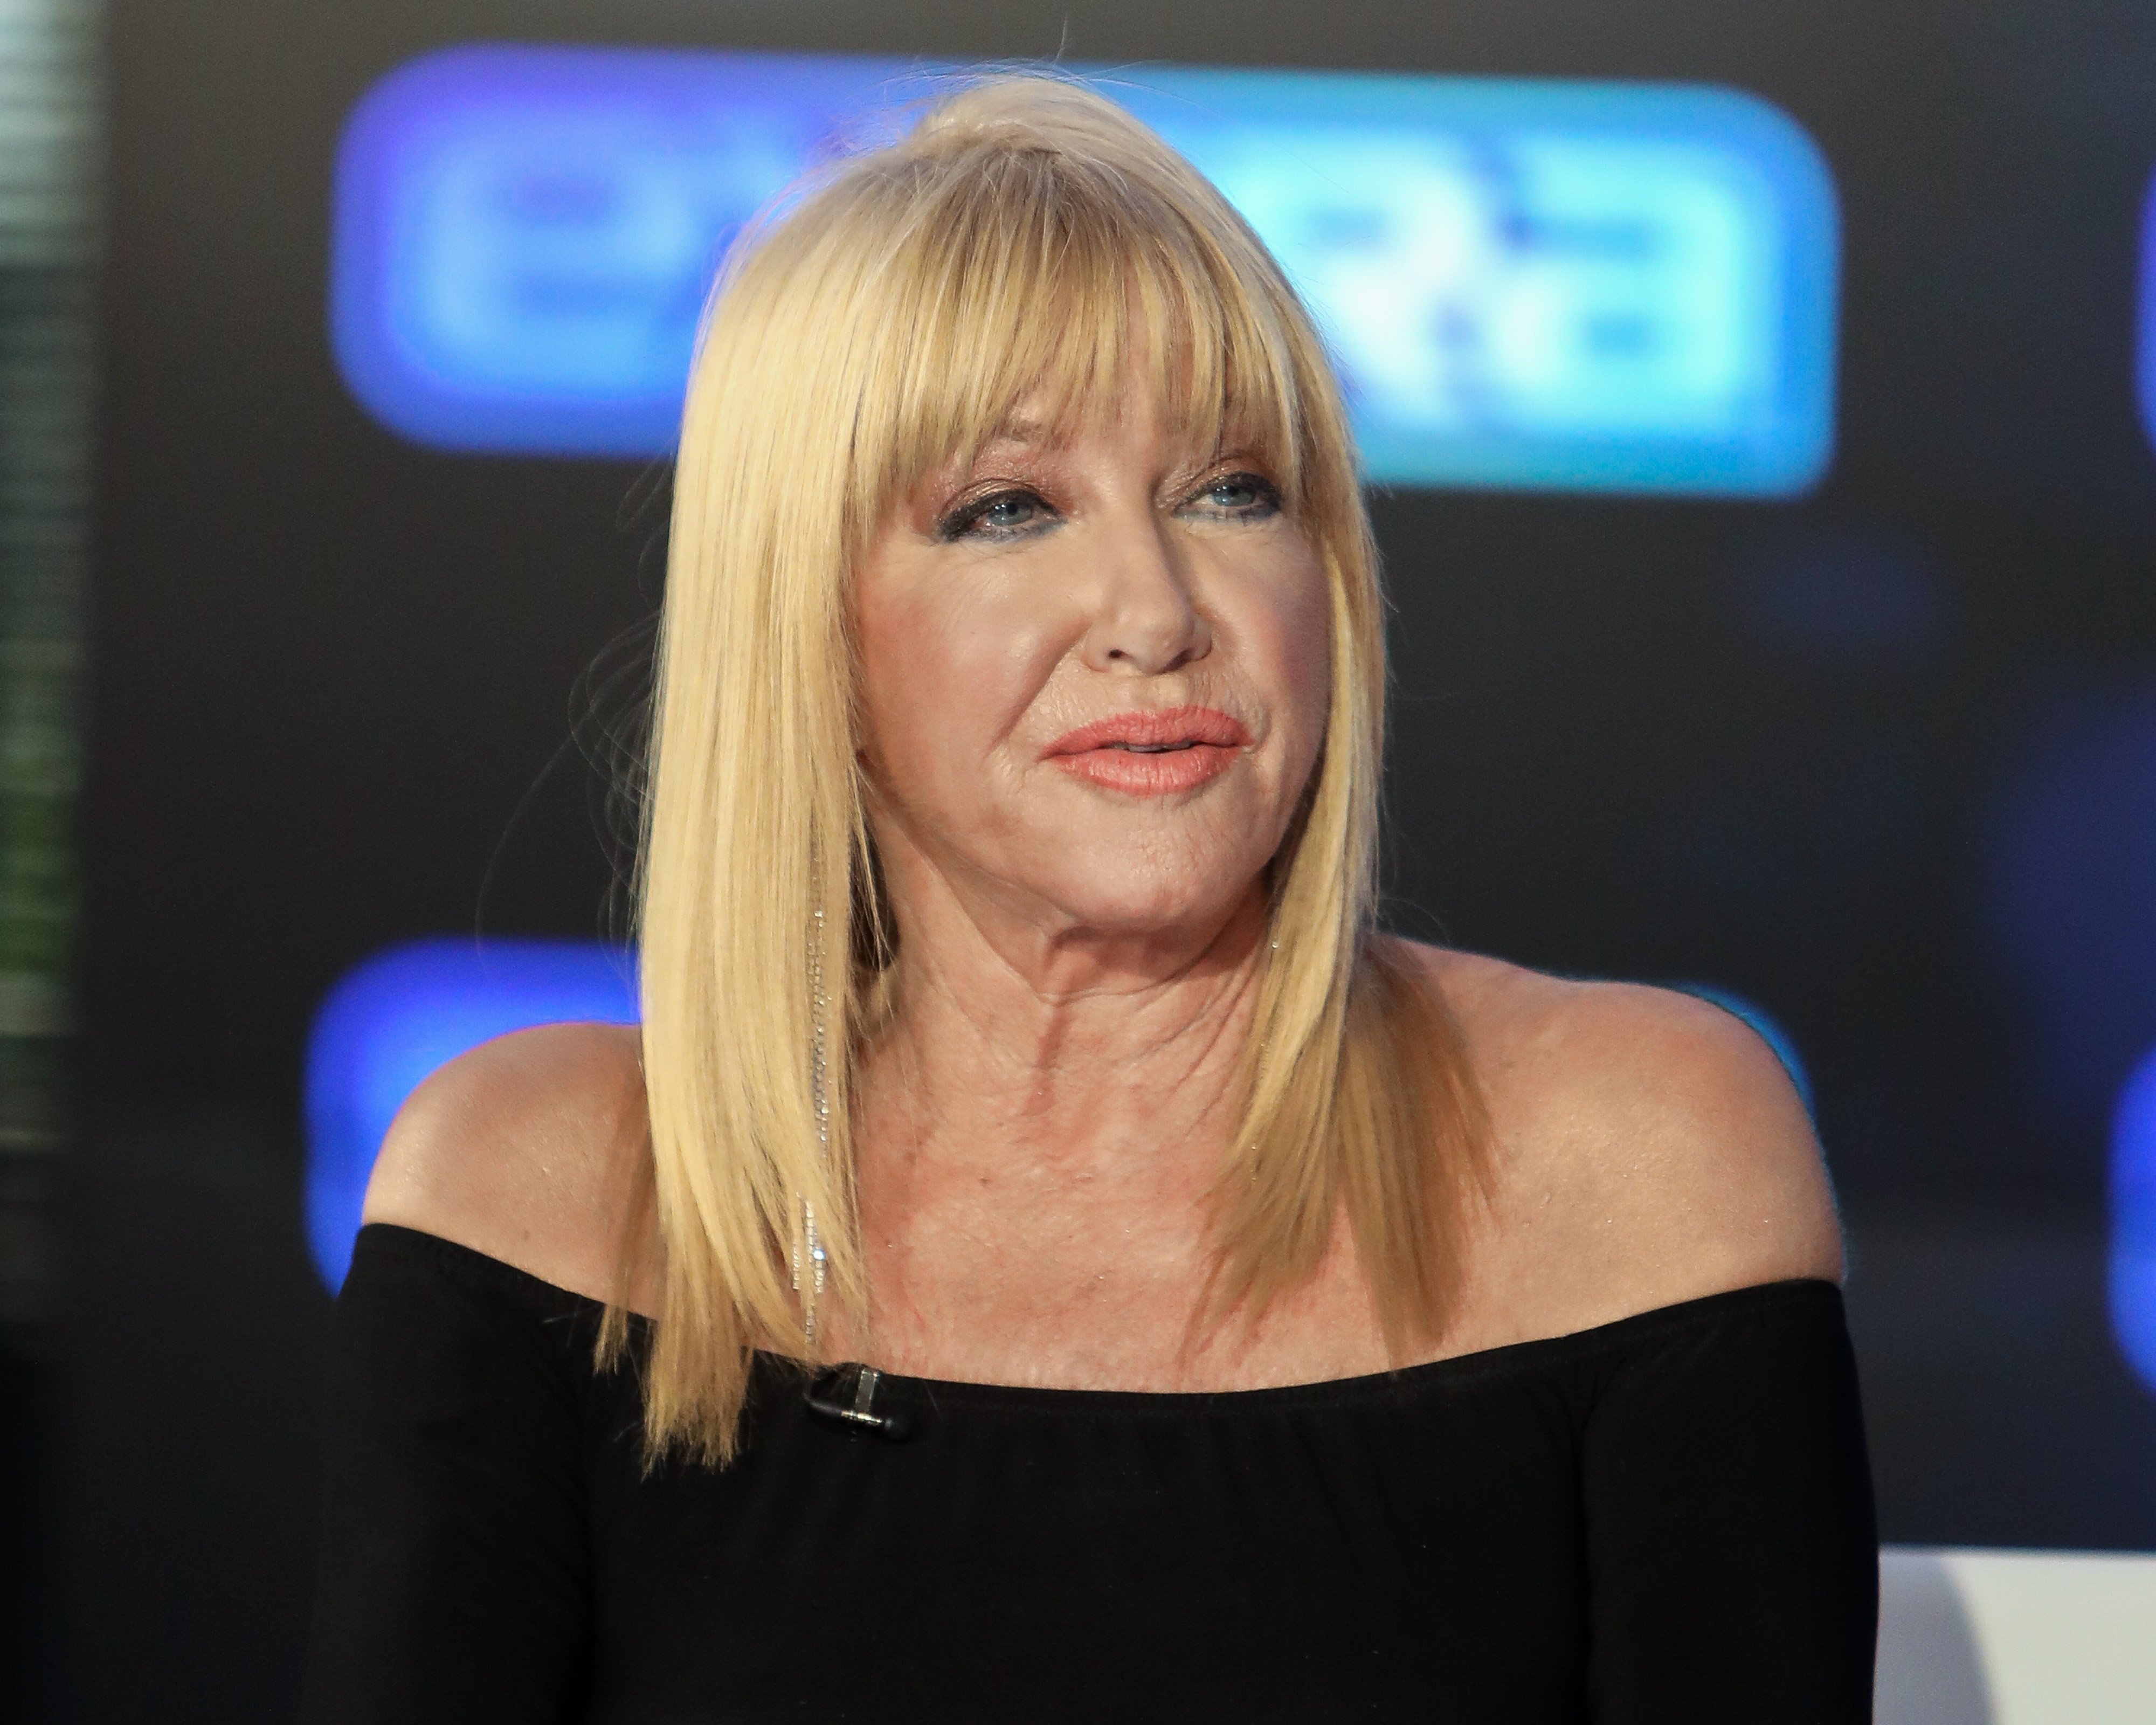 Suzanne Somers visits “Extra” at Burbank Studios on February 19, 2020, in Burbank, California | Source: Getty Images